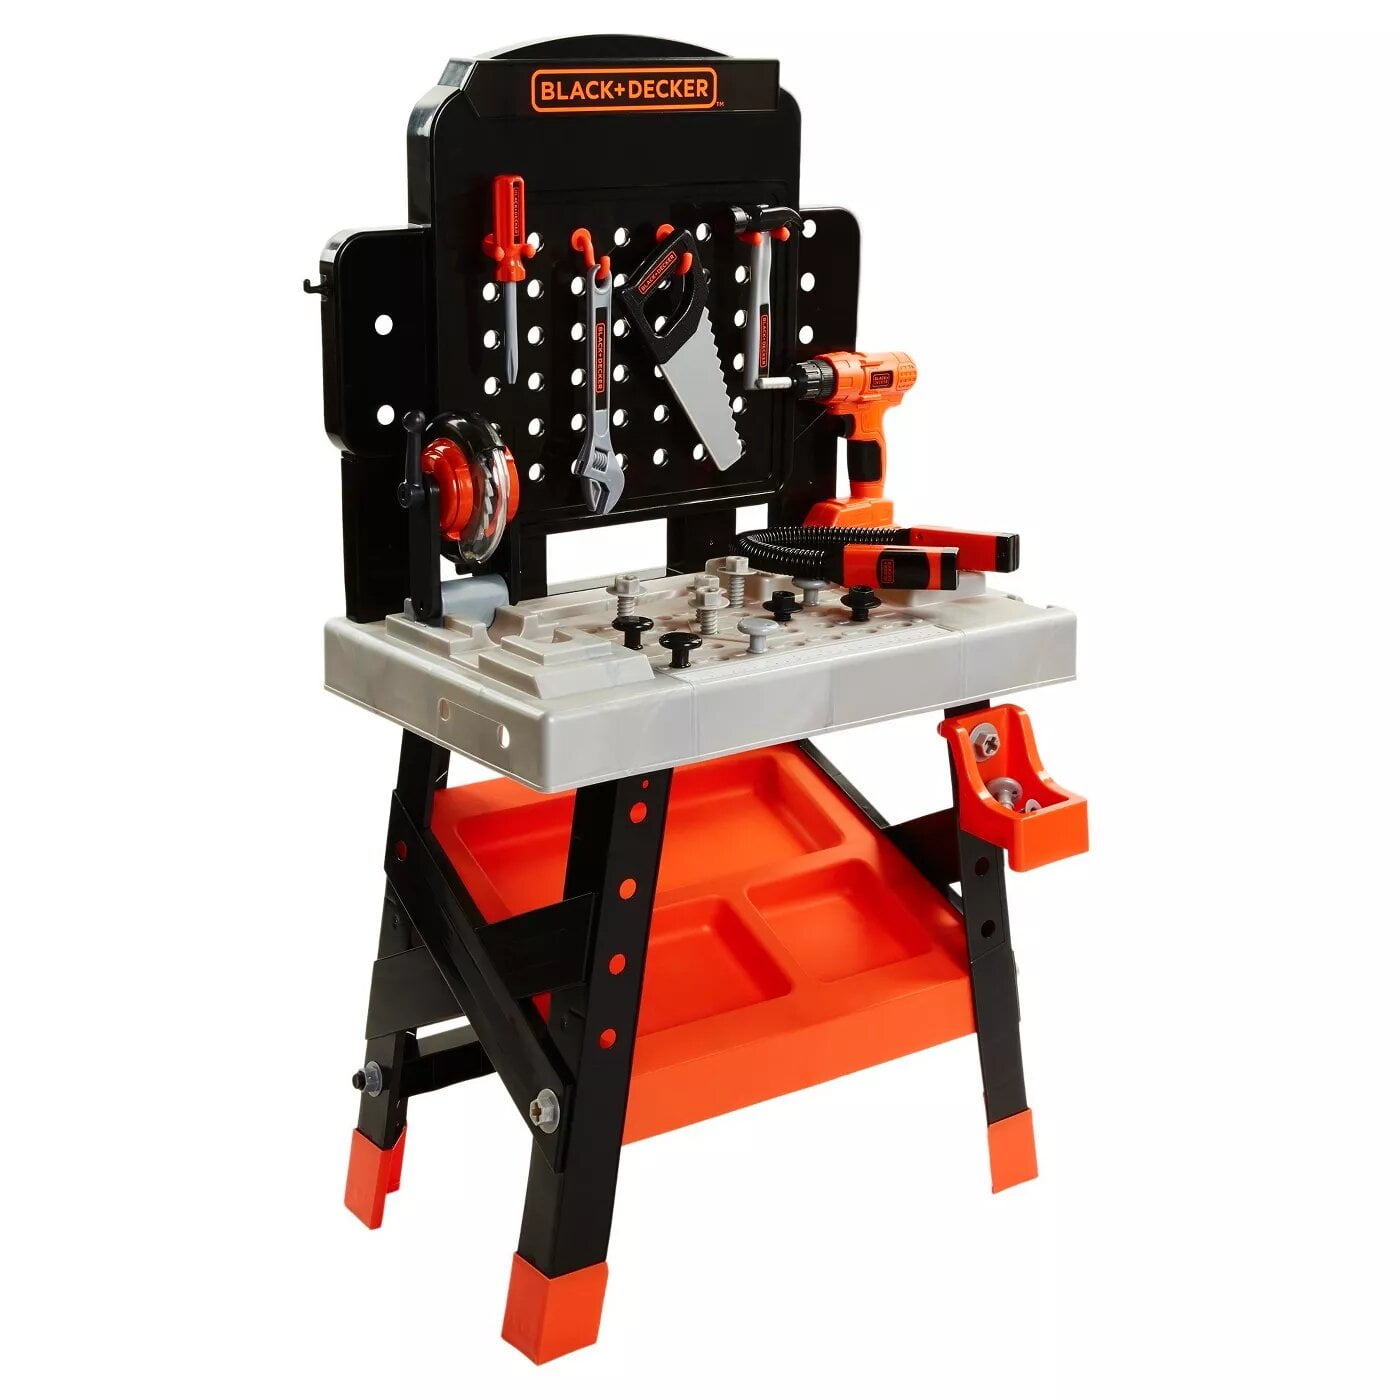 Review of the Black and Decker Kids Workbench 